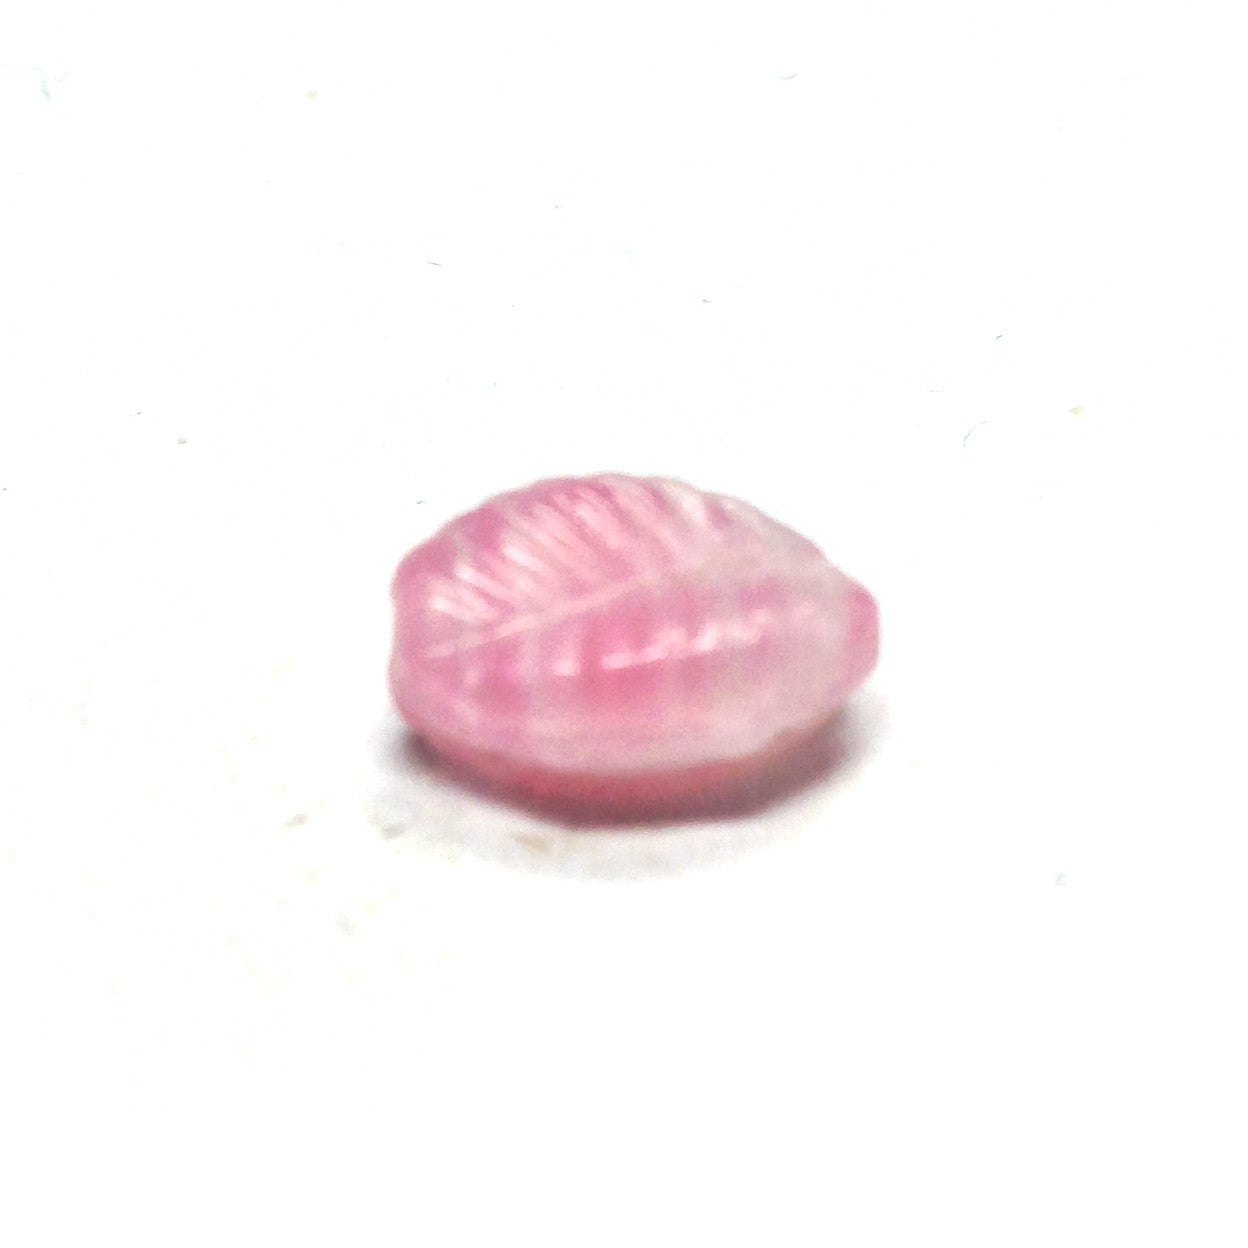 19X12MM Pink Glass Leaf Bead (36 pieces)